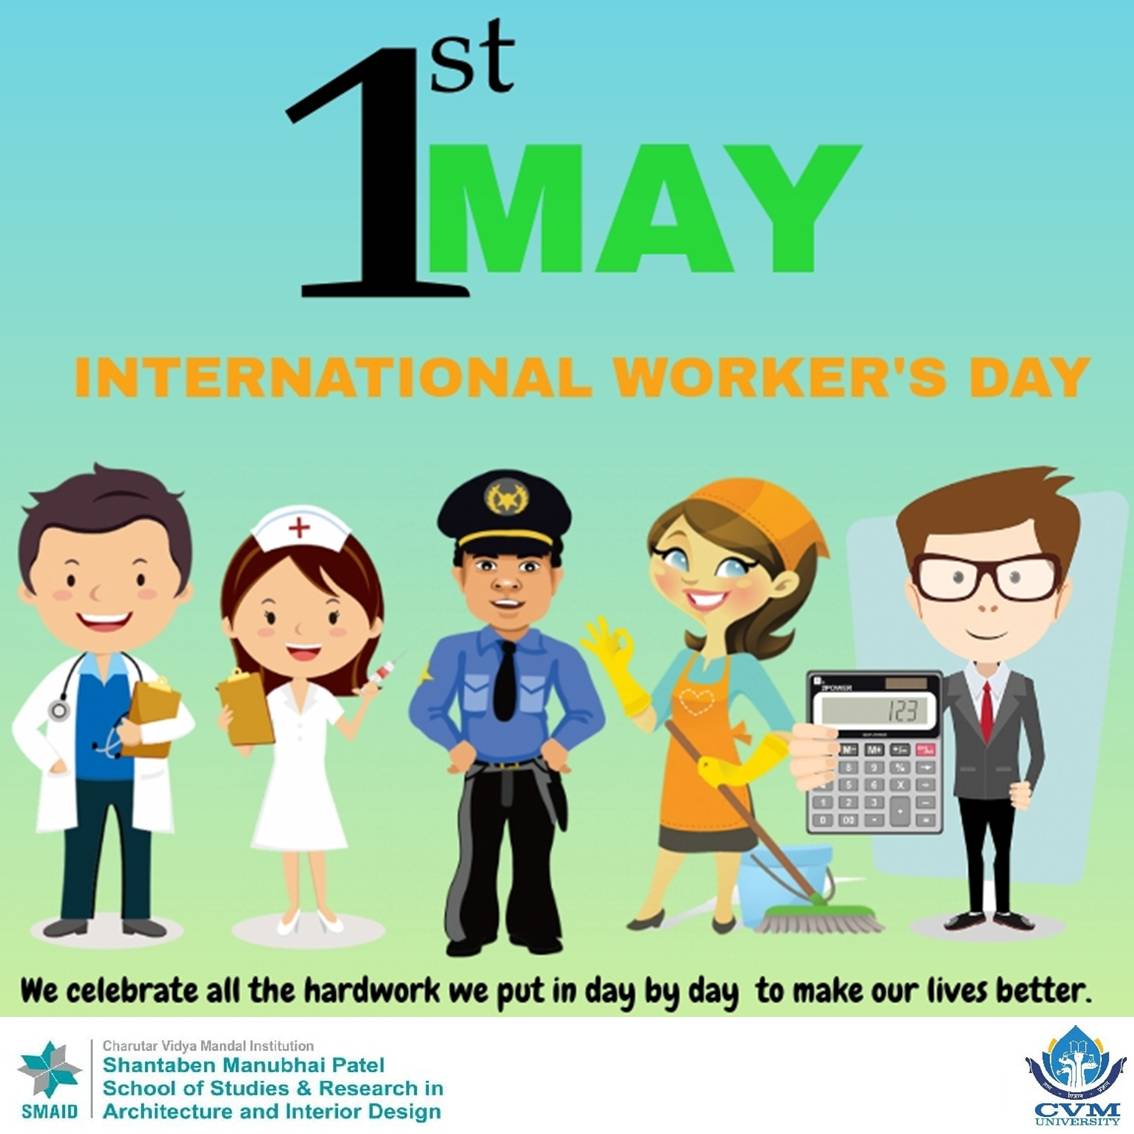 1st May International worker's day